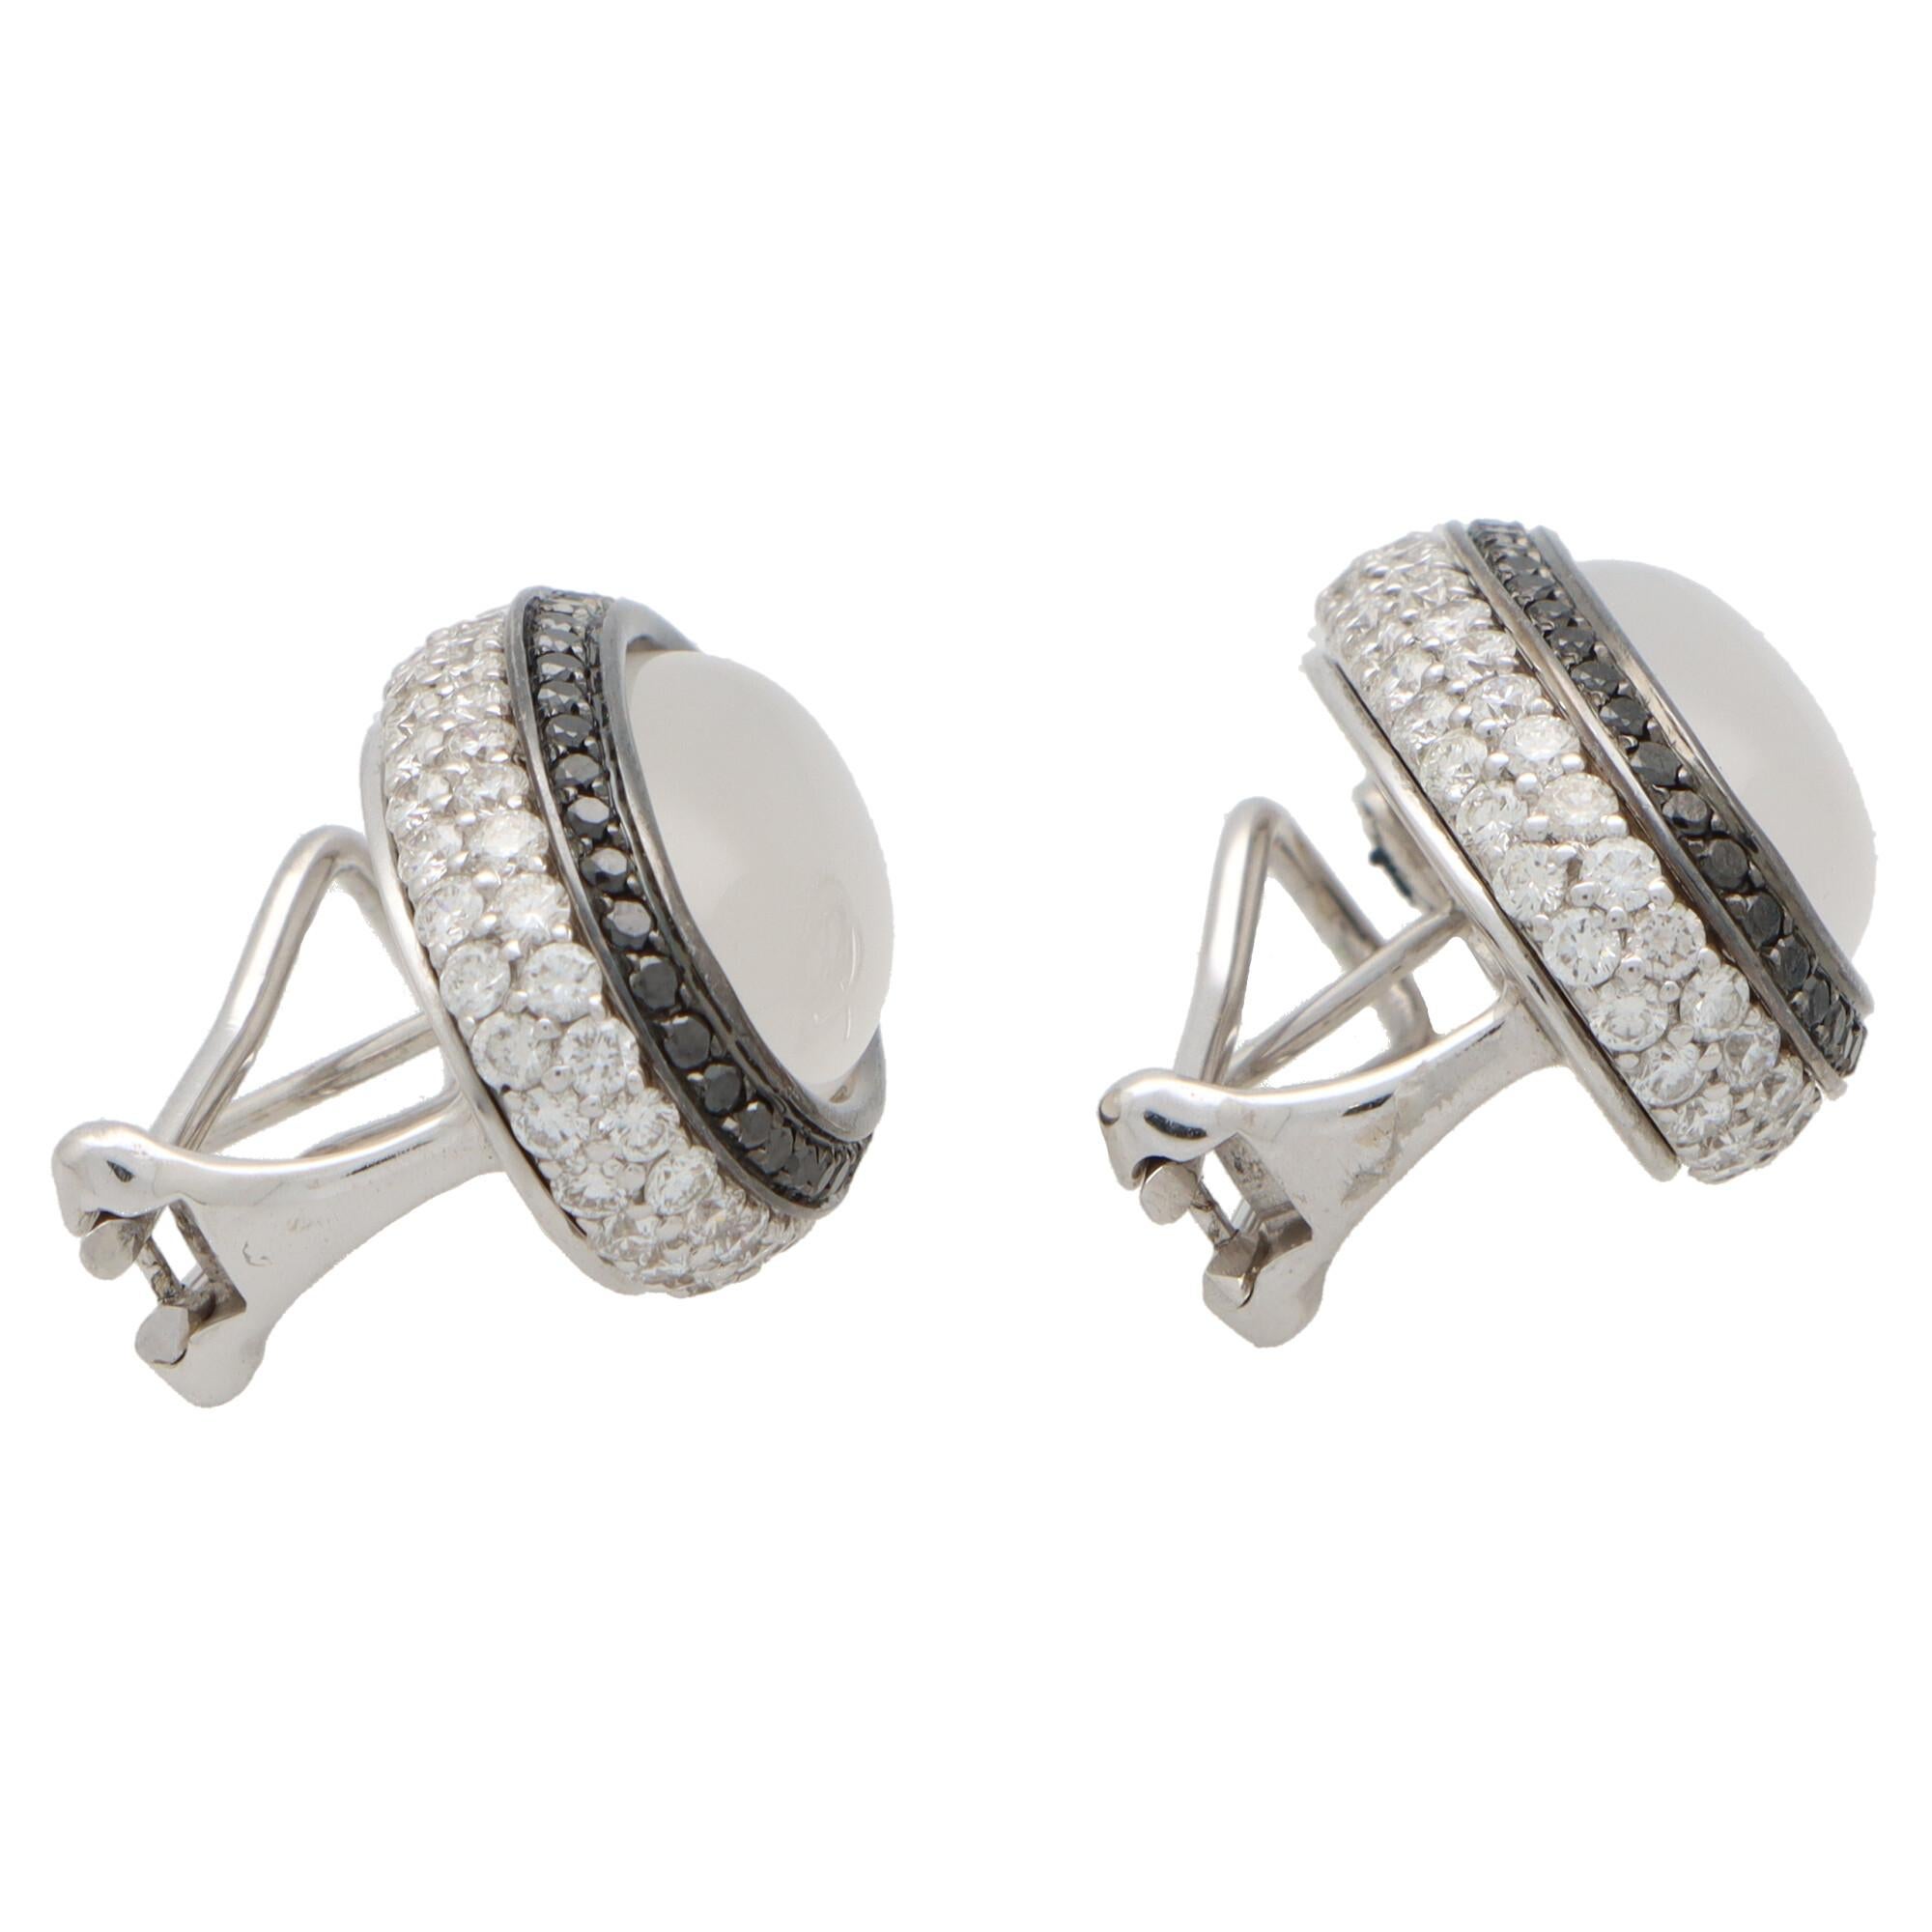 Vintage Luca Carati Quartz and Diamond Earrings Set in 18k White Gold In Good Condition For Sale In London, GB